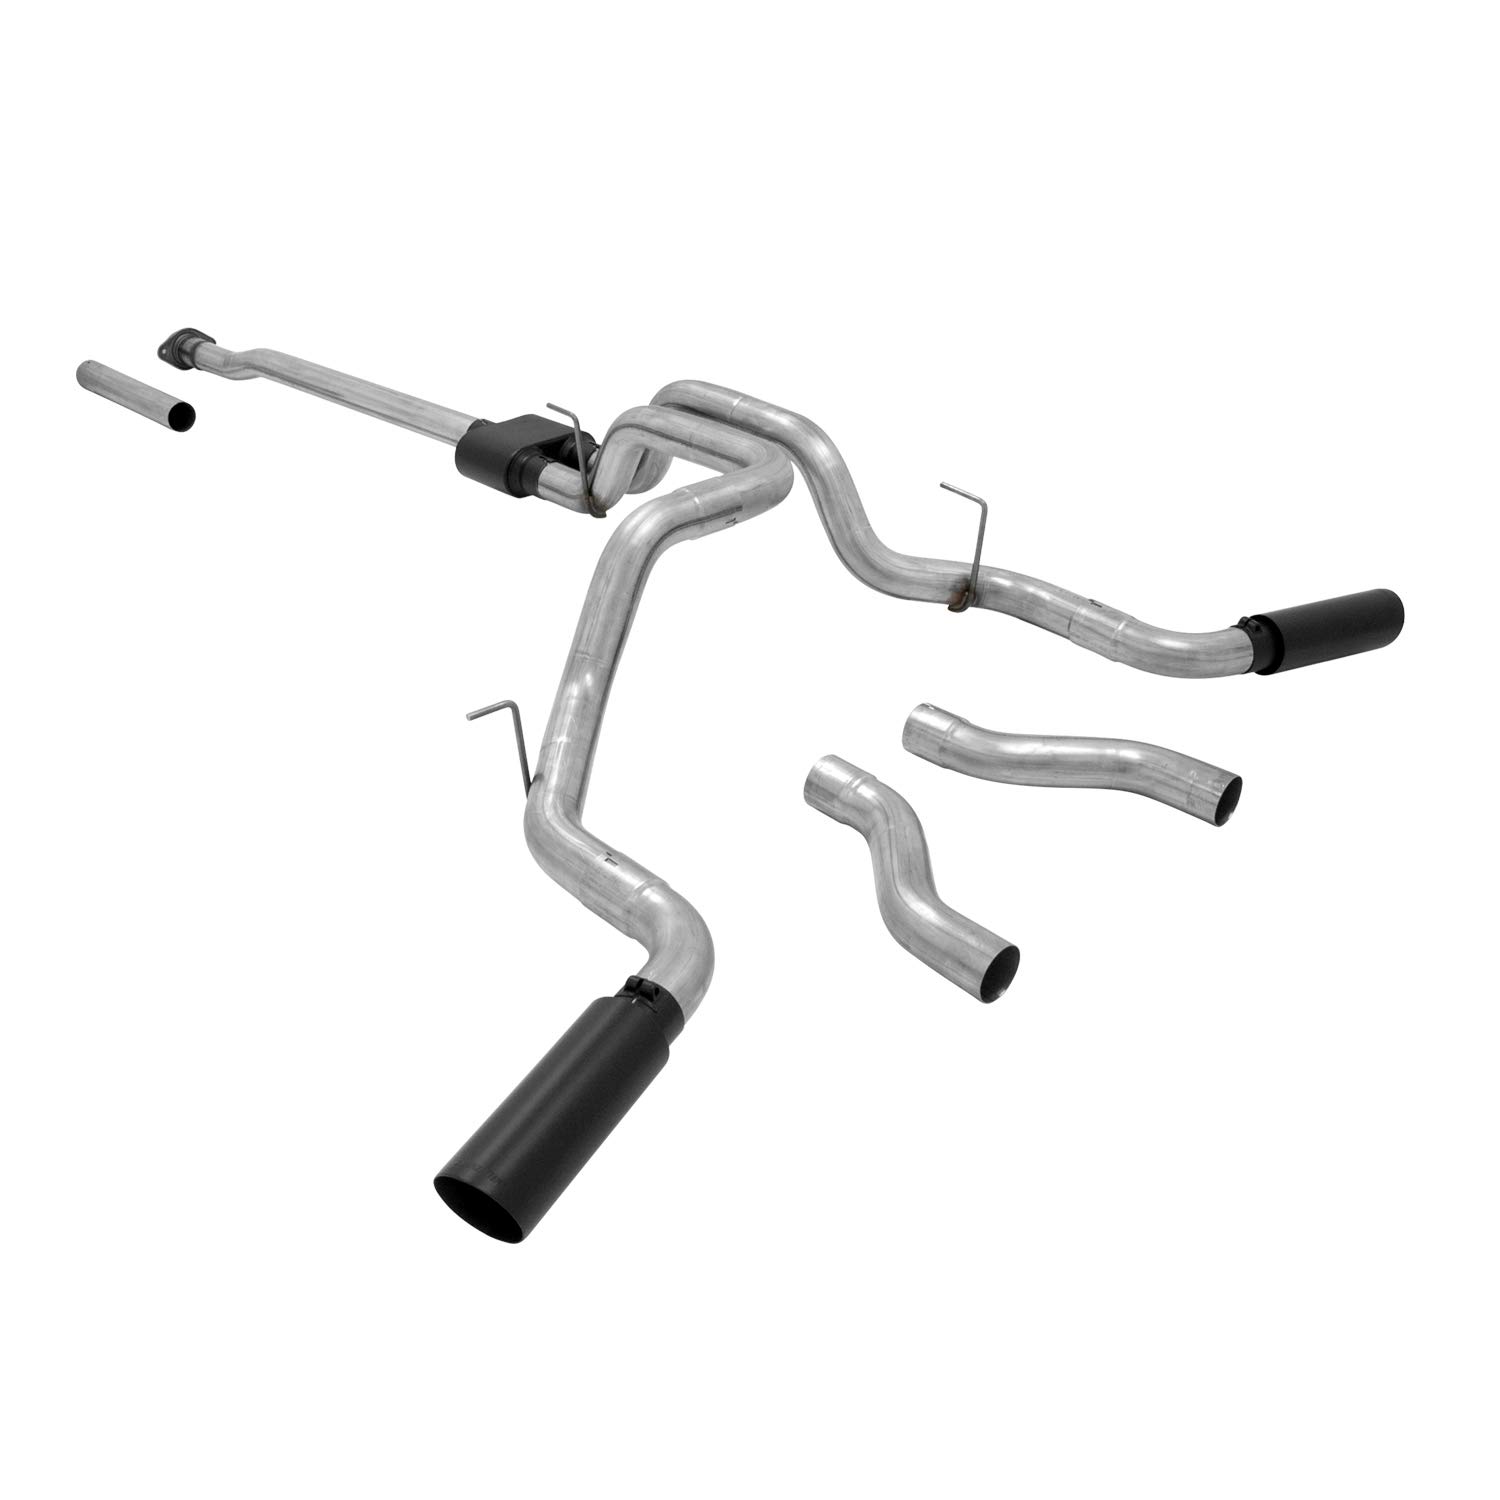 09-14 F150 V8 GAS OUTLAW CAT-BACK EXHAUST SYSTEM SS